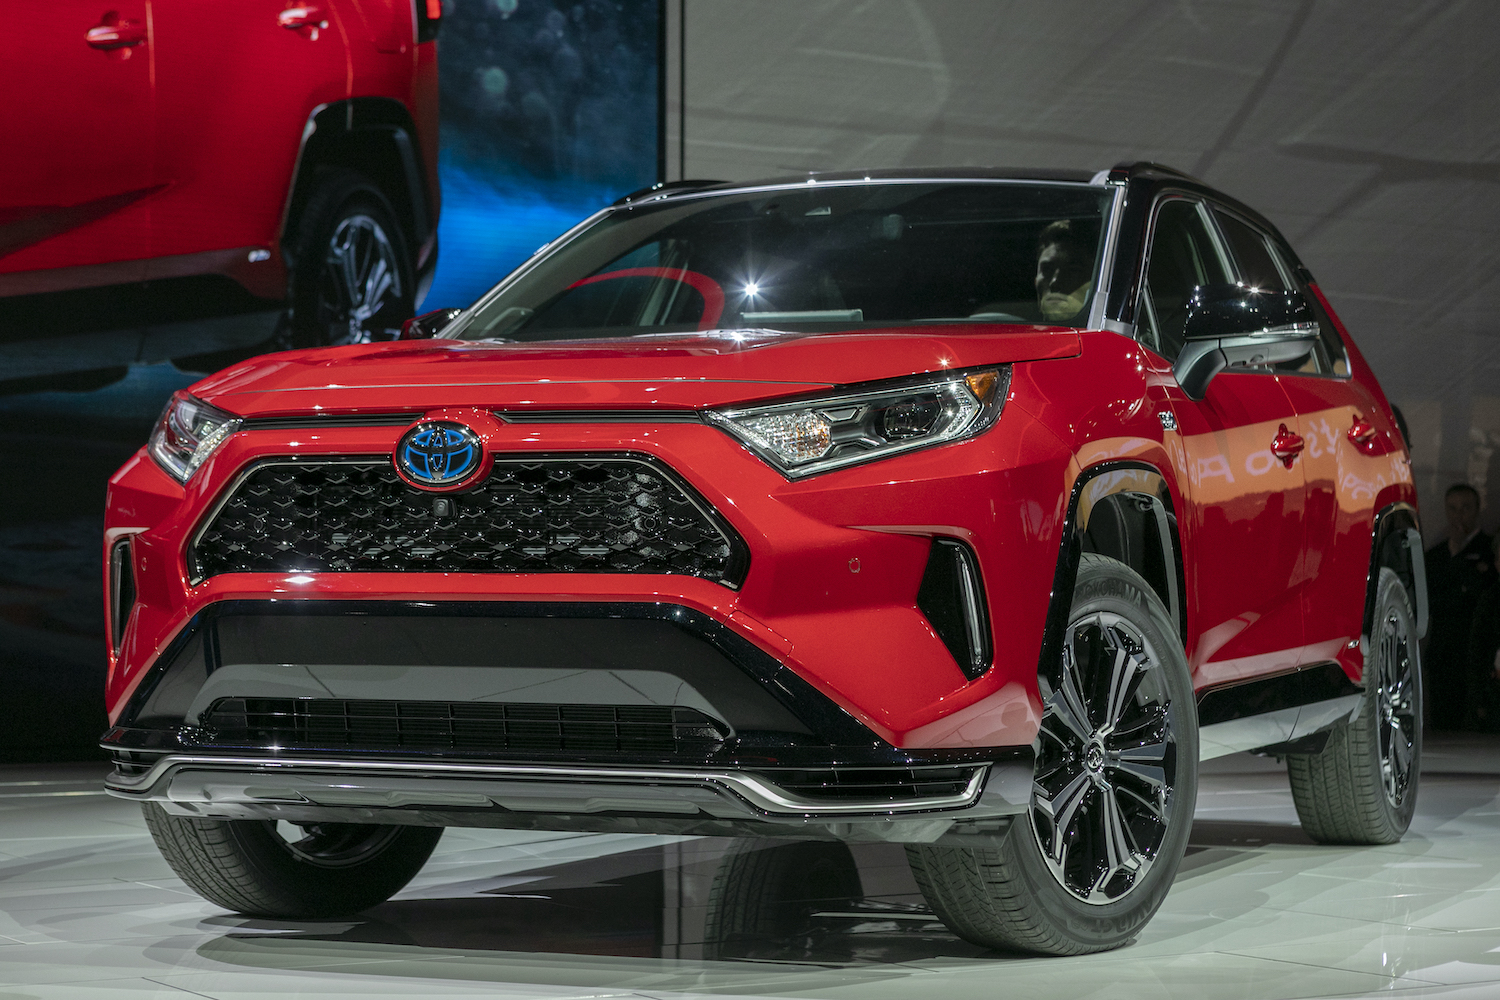 The Toyota RAV4 Hybrid, sibling to the RAV4 Prime, is shown at AutoMobility LA on November 20, 2019